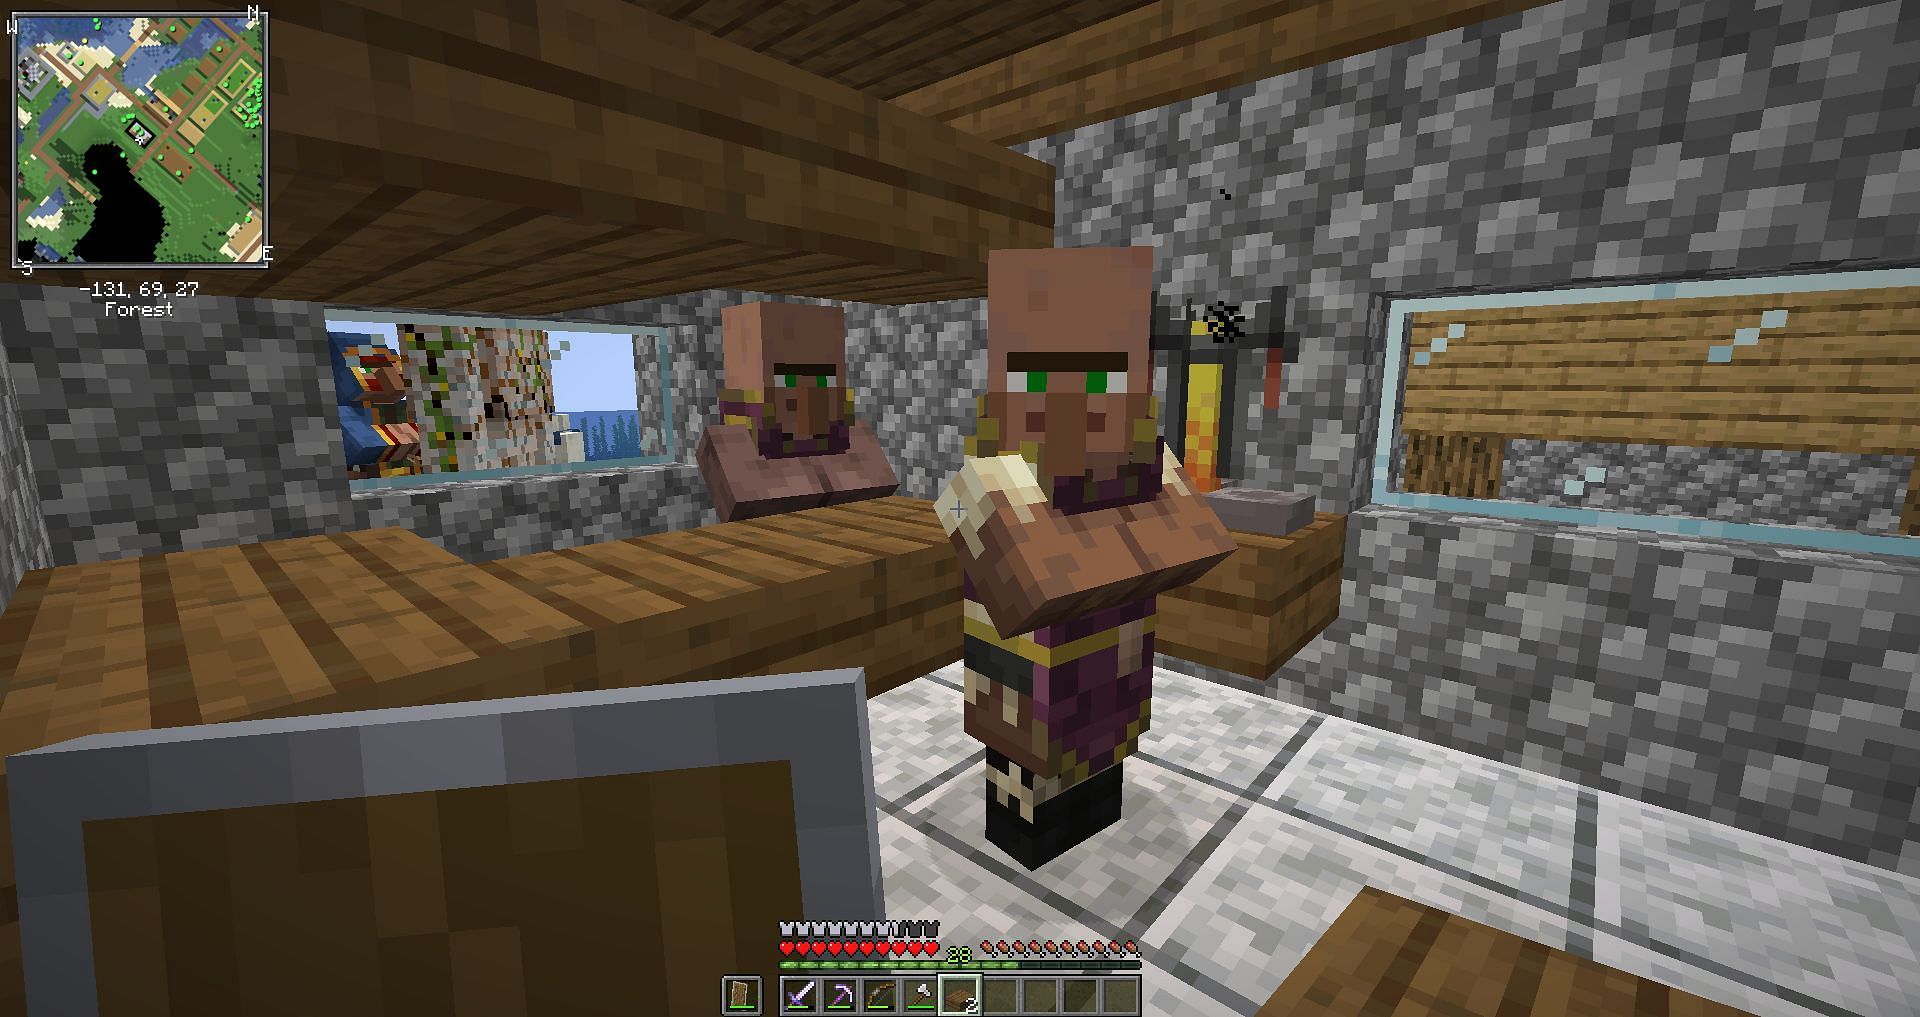 A Cleric in Minecraft (Image via Minecraft)